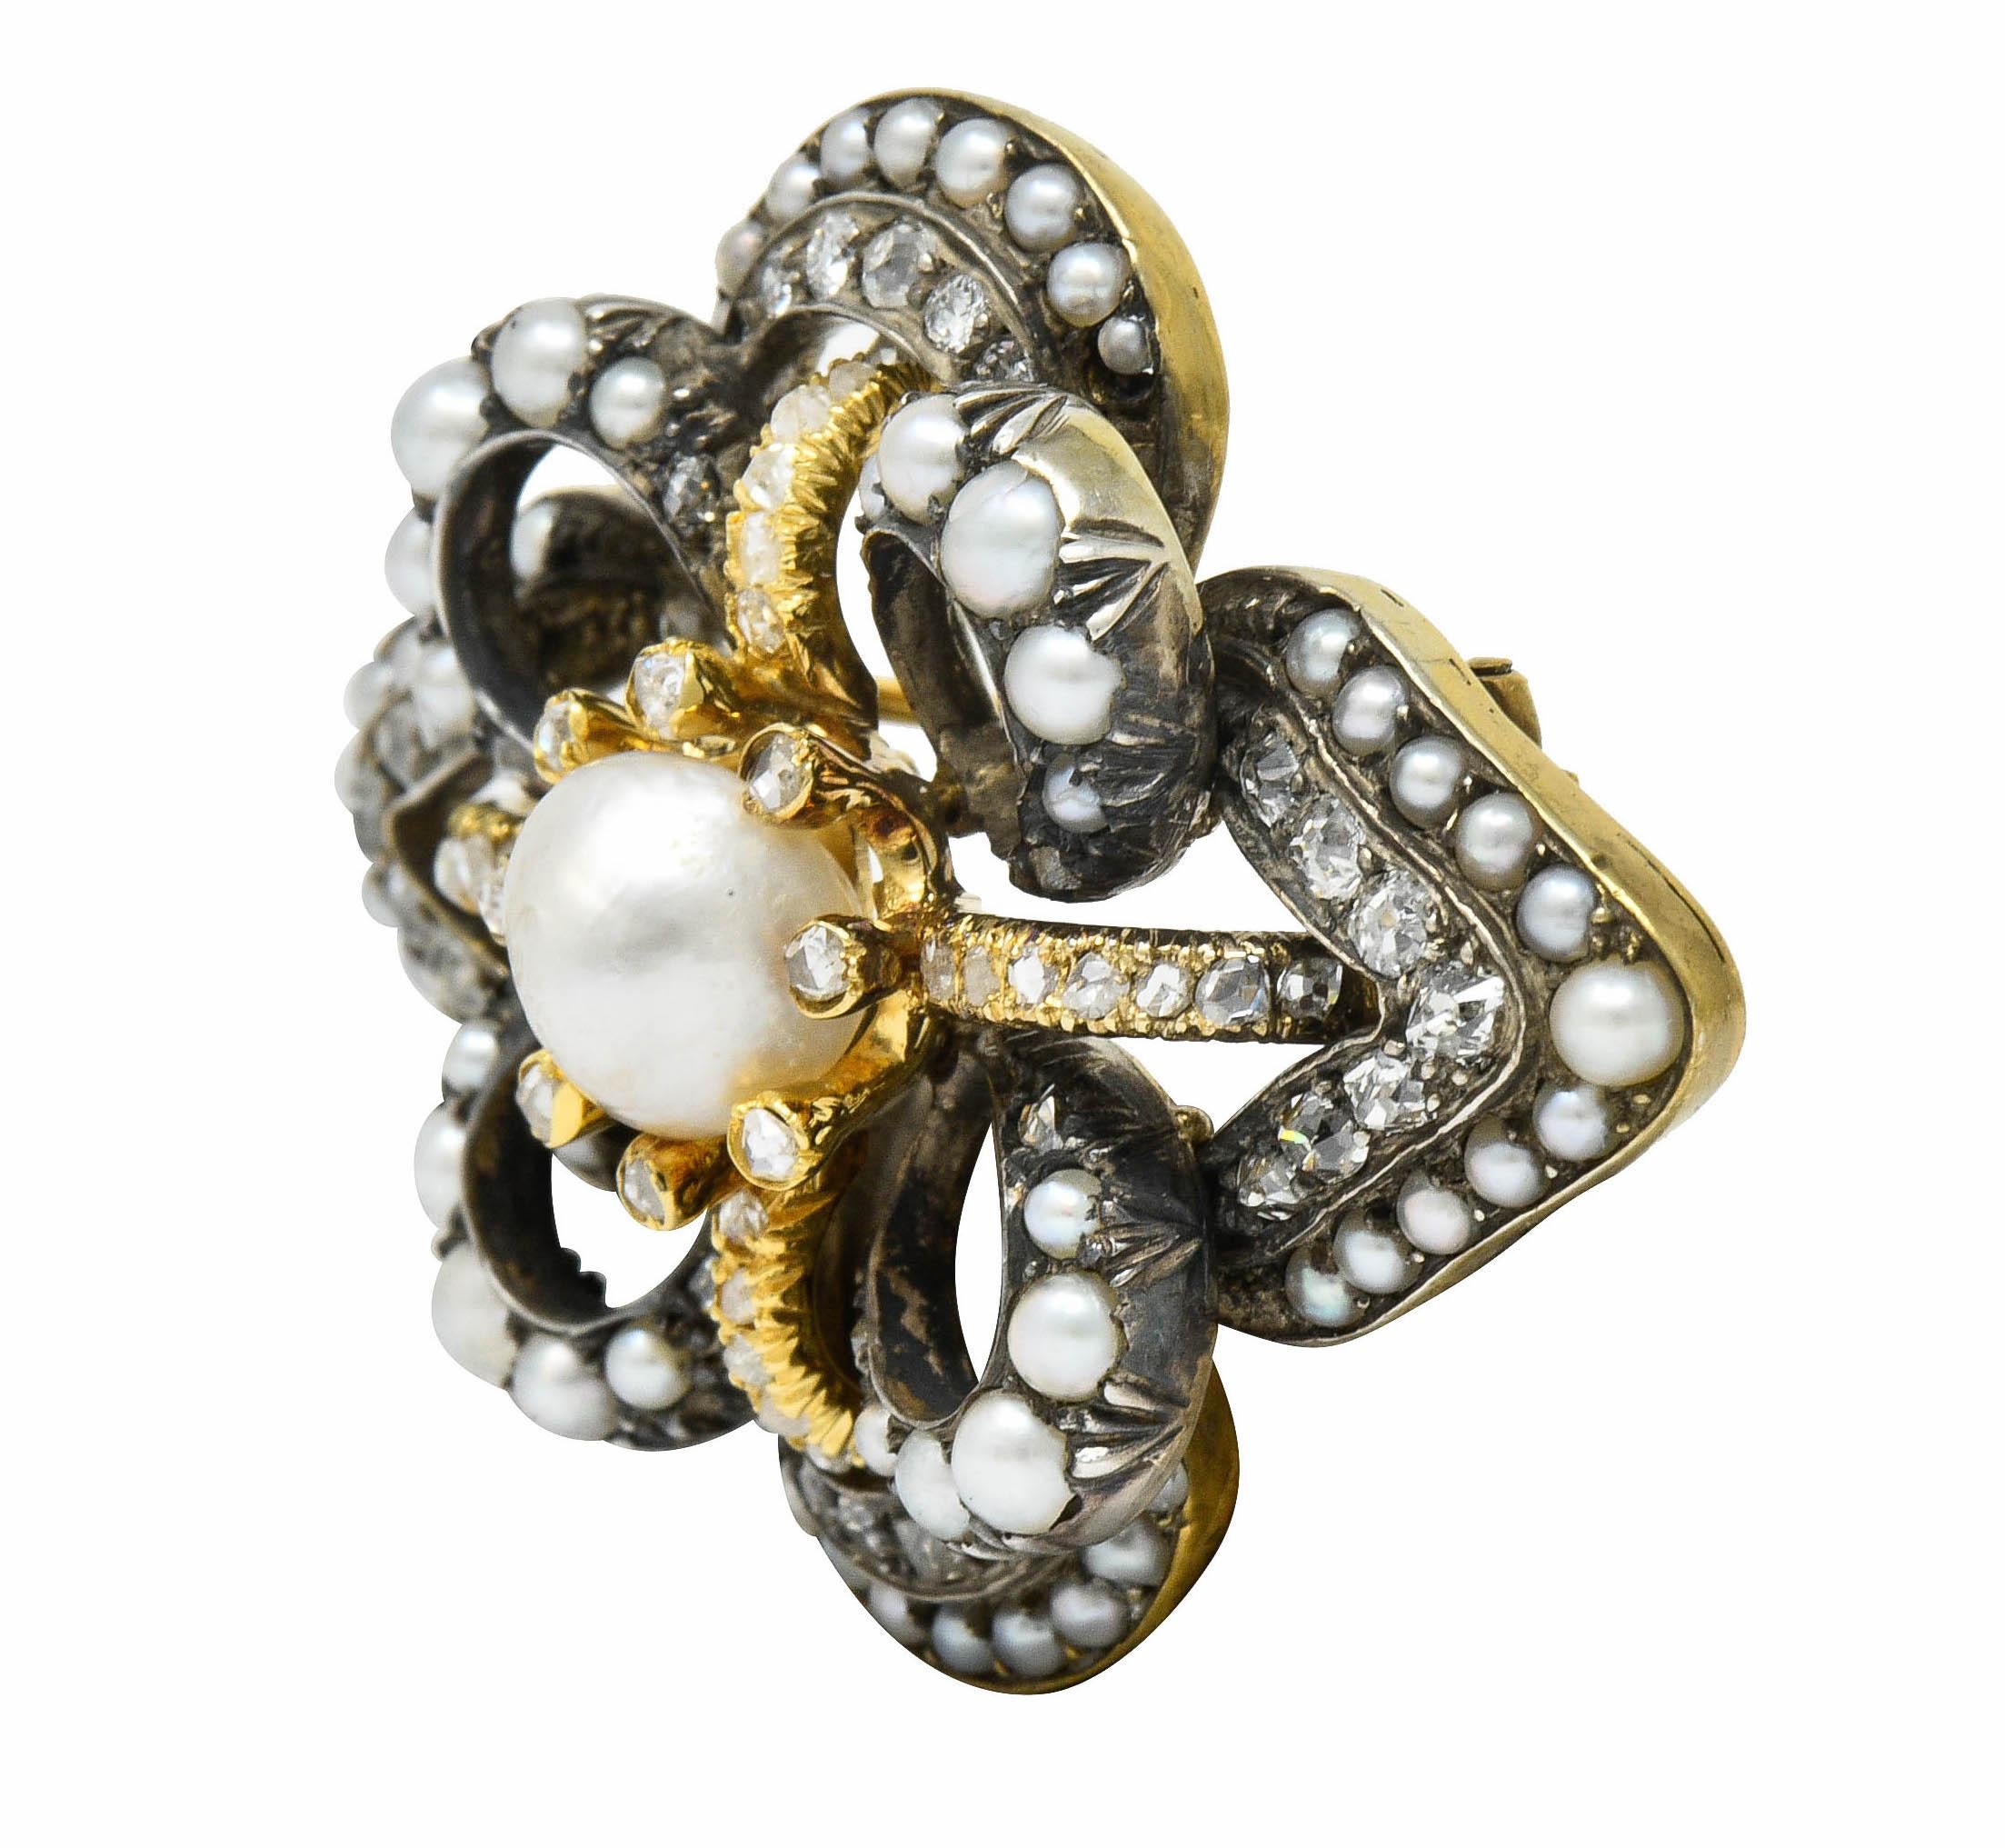 Brooch features two overlapping stylized and dynamic quatrefoil forms creating a floral design

Centering a 7.8 mm semi-round baroque pearl with white body color and features strong rosè overtones; good in luster

Surrounded by natural freshwater